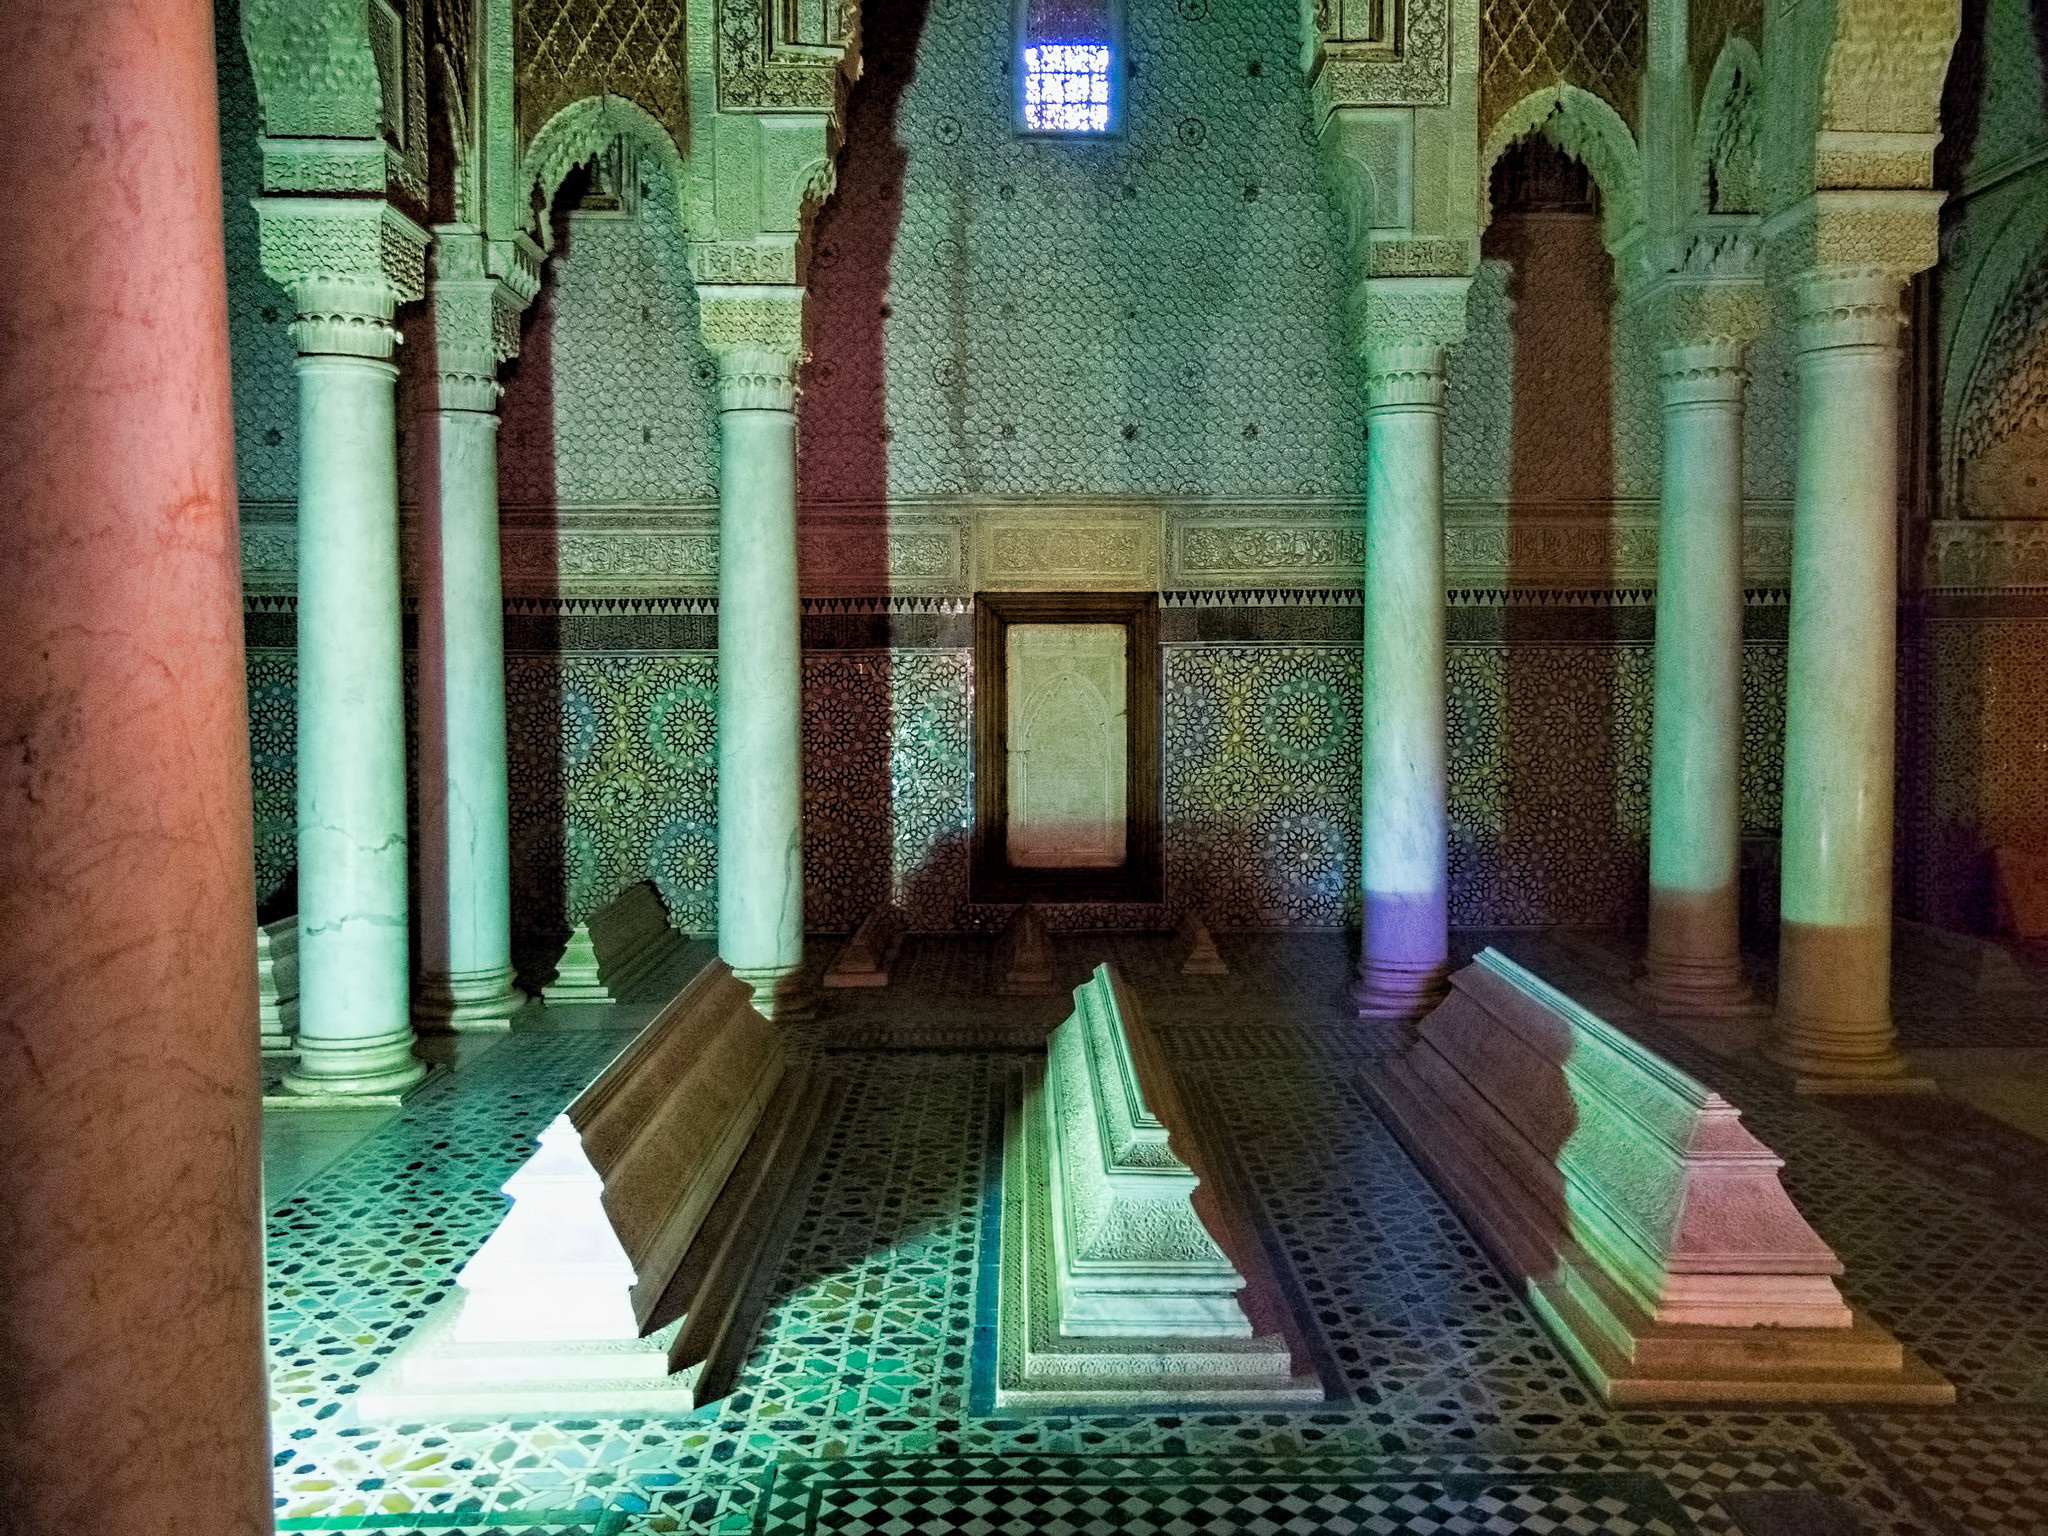 Saadian tombs history, Marrakesh's ancient legacy, Architectural wonders, Historical significance, 2050x1540 HD Desktop